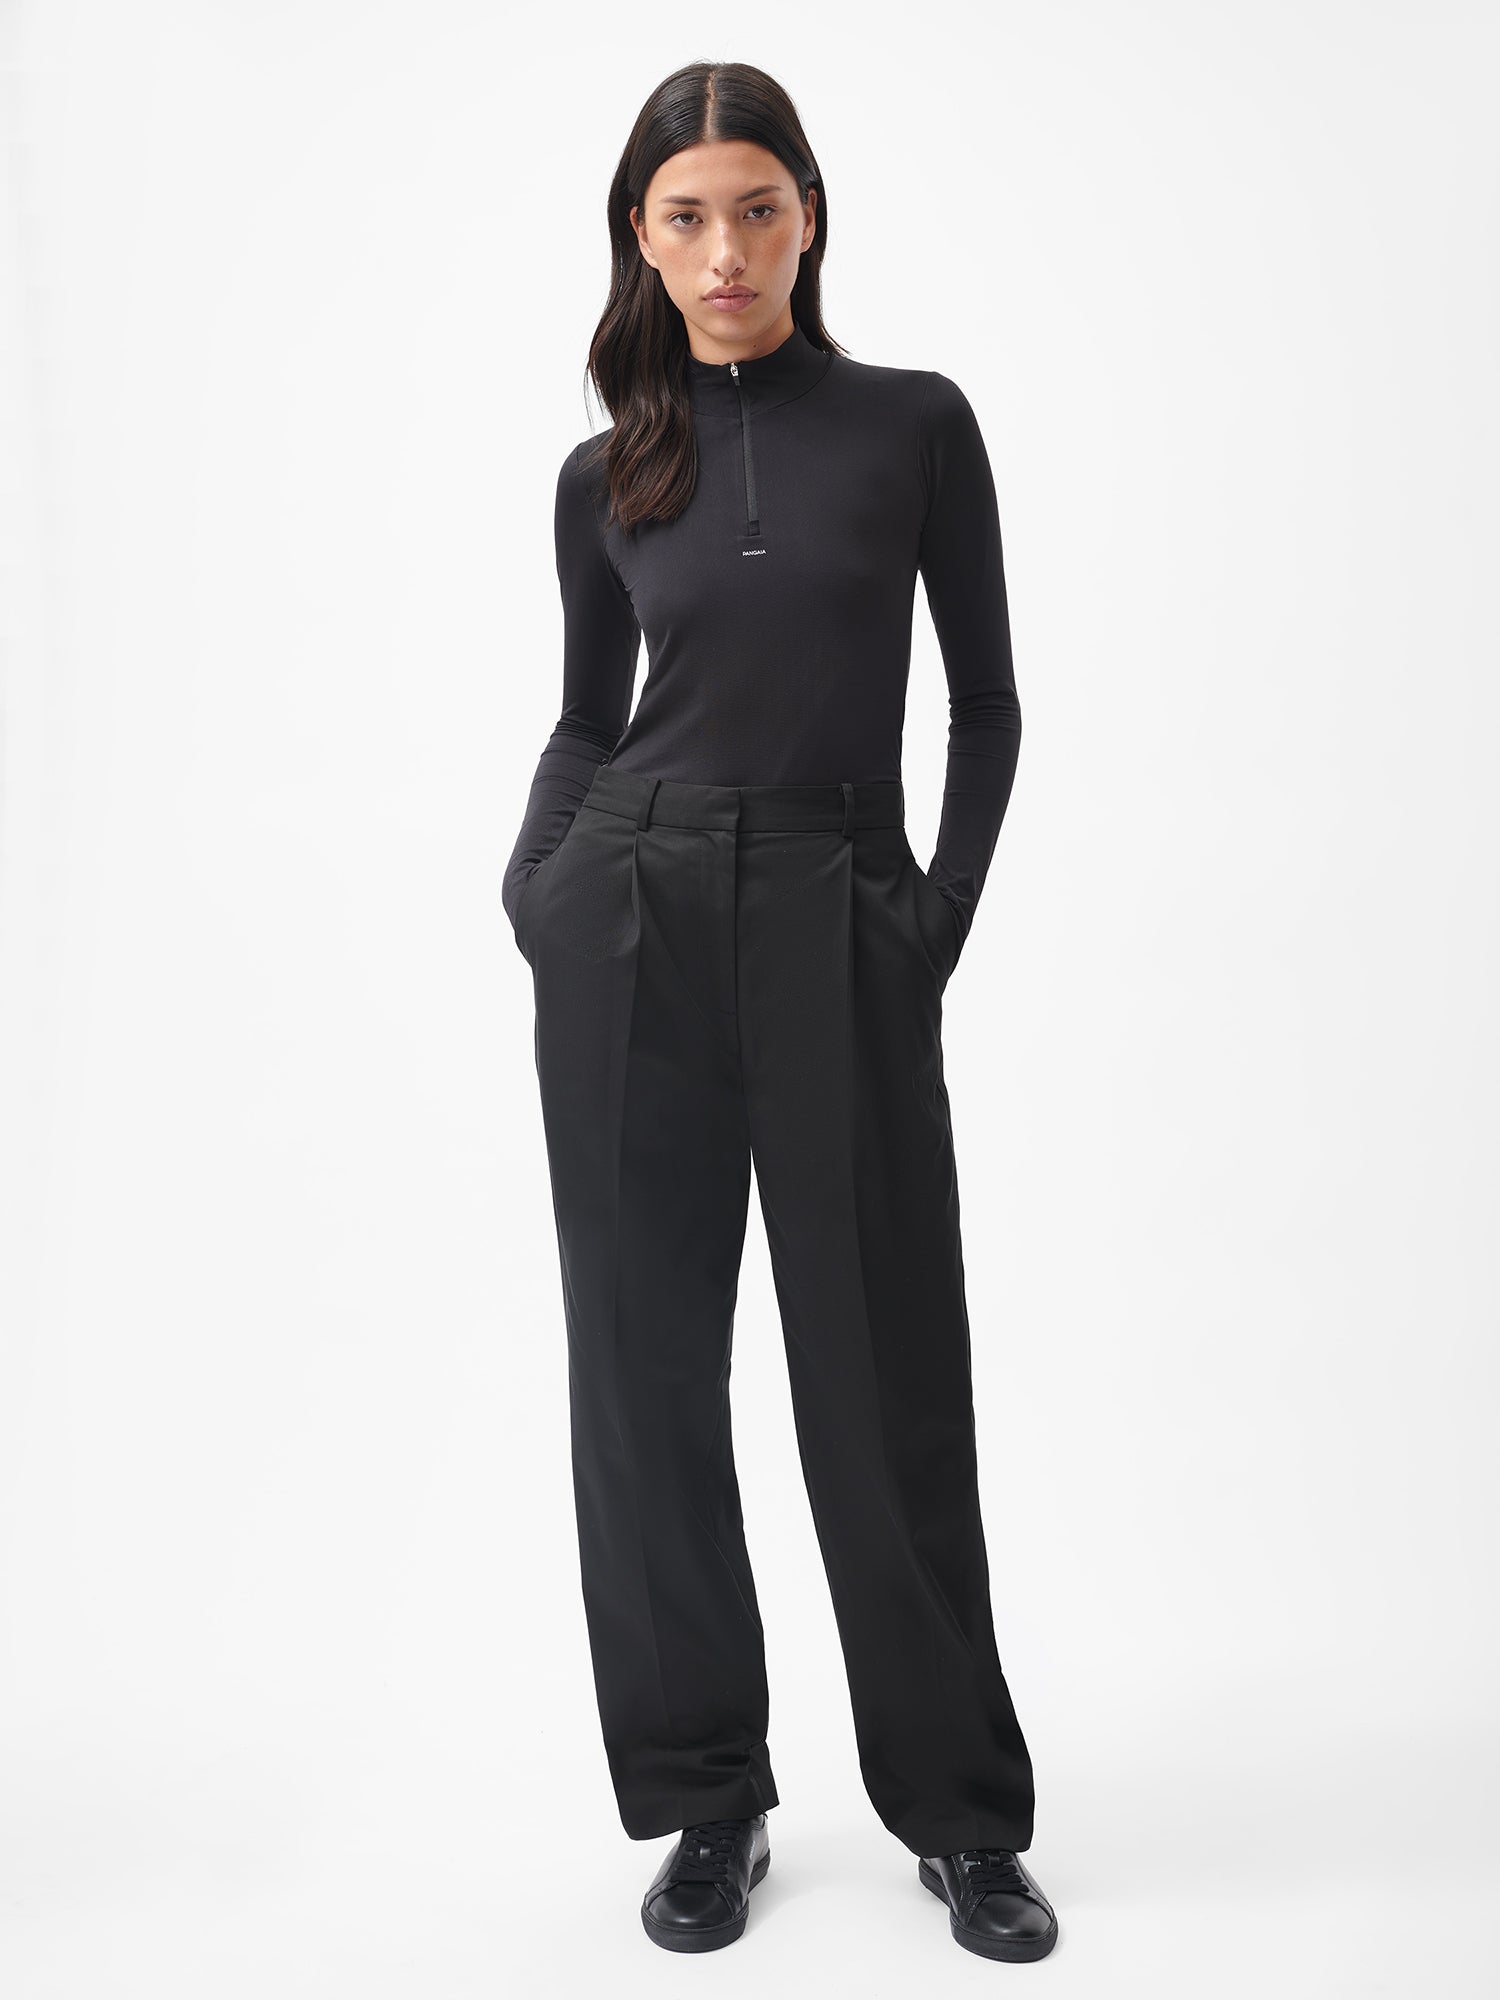 Occasions | Black Tailor Fit Dinner Trousers | SuitDirect.co.uk